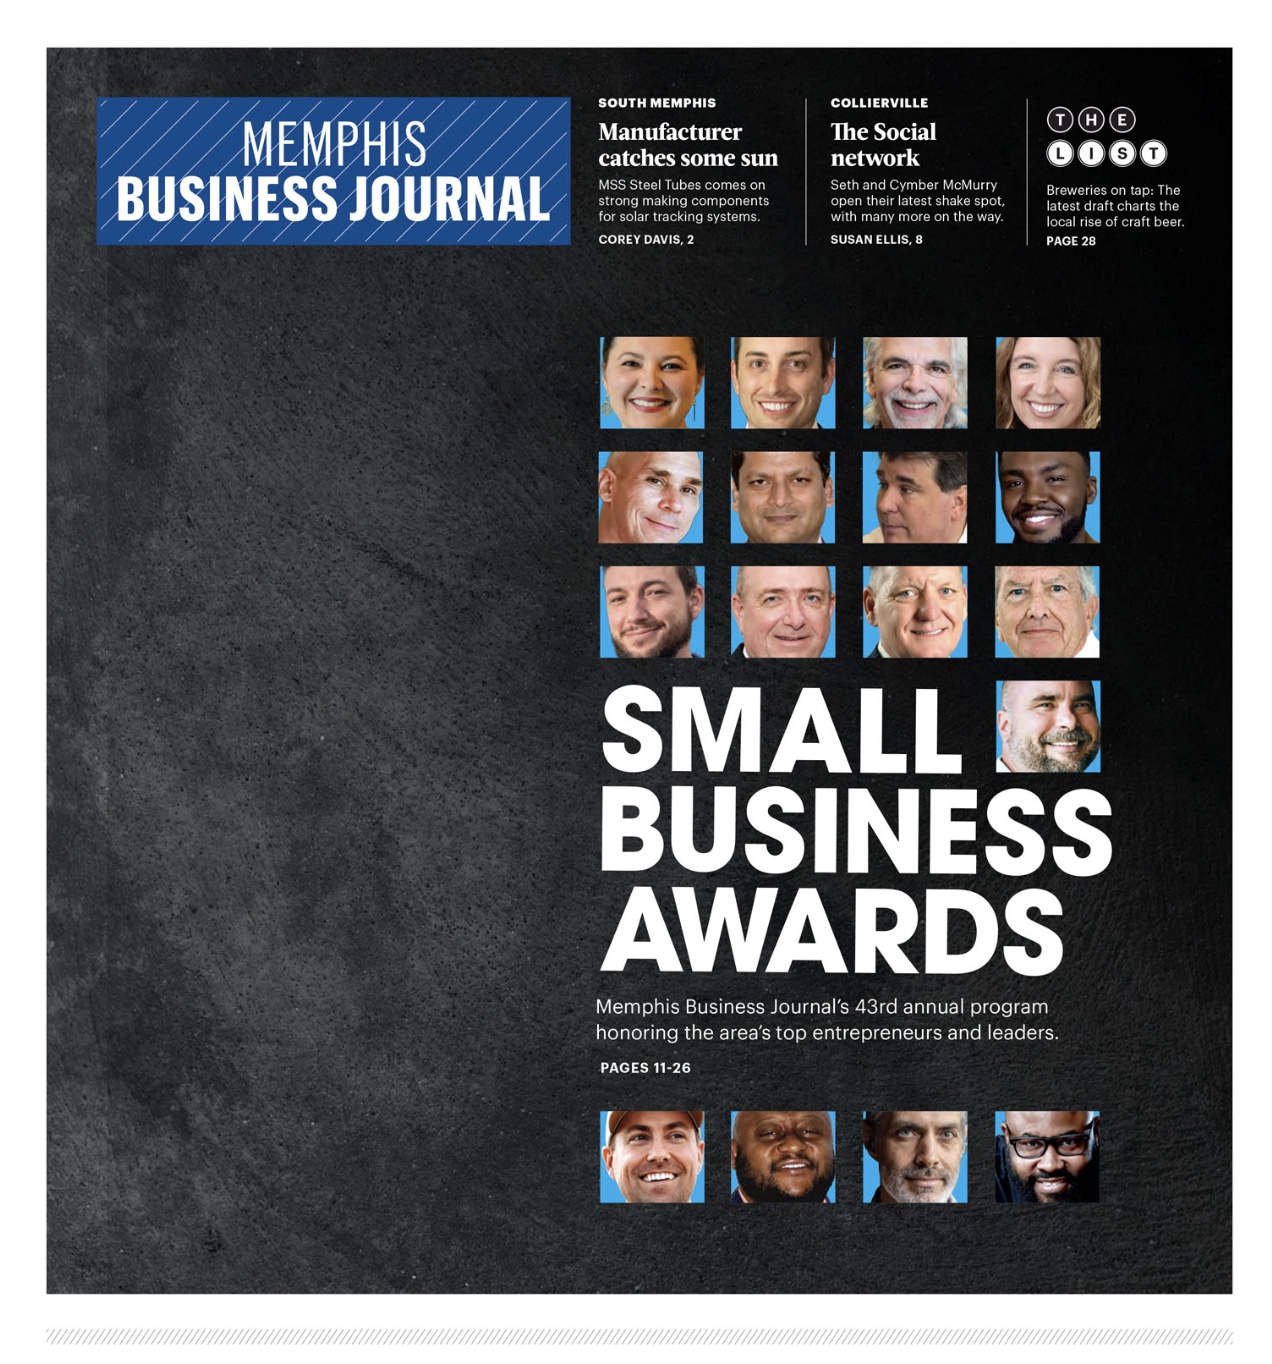 The Crone Law Firm was recognized as 1 of 16 Finalists at the Memphis Business Journal's 43rd Small Business Awards in May 2023, and CEO/Founder Alan G Crone was featured on the program cover.